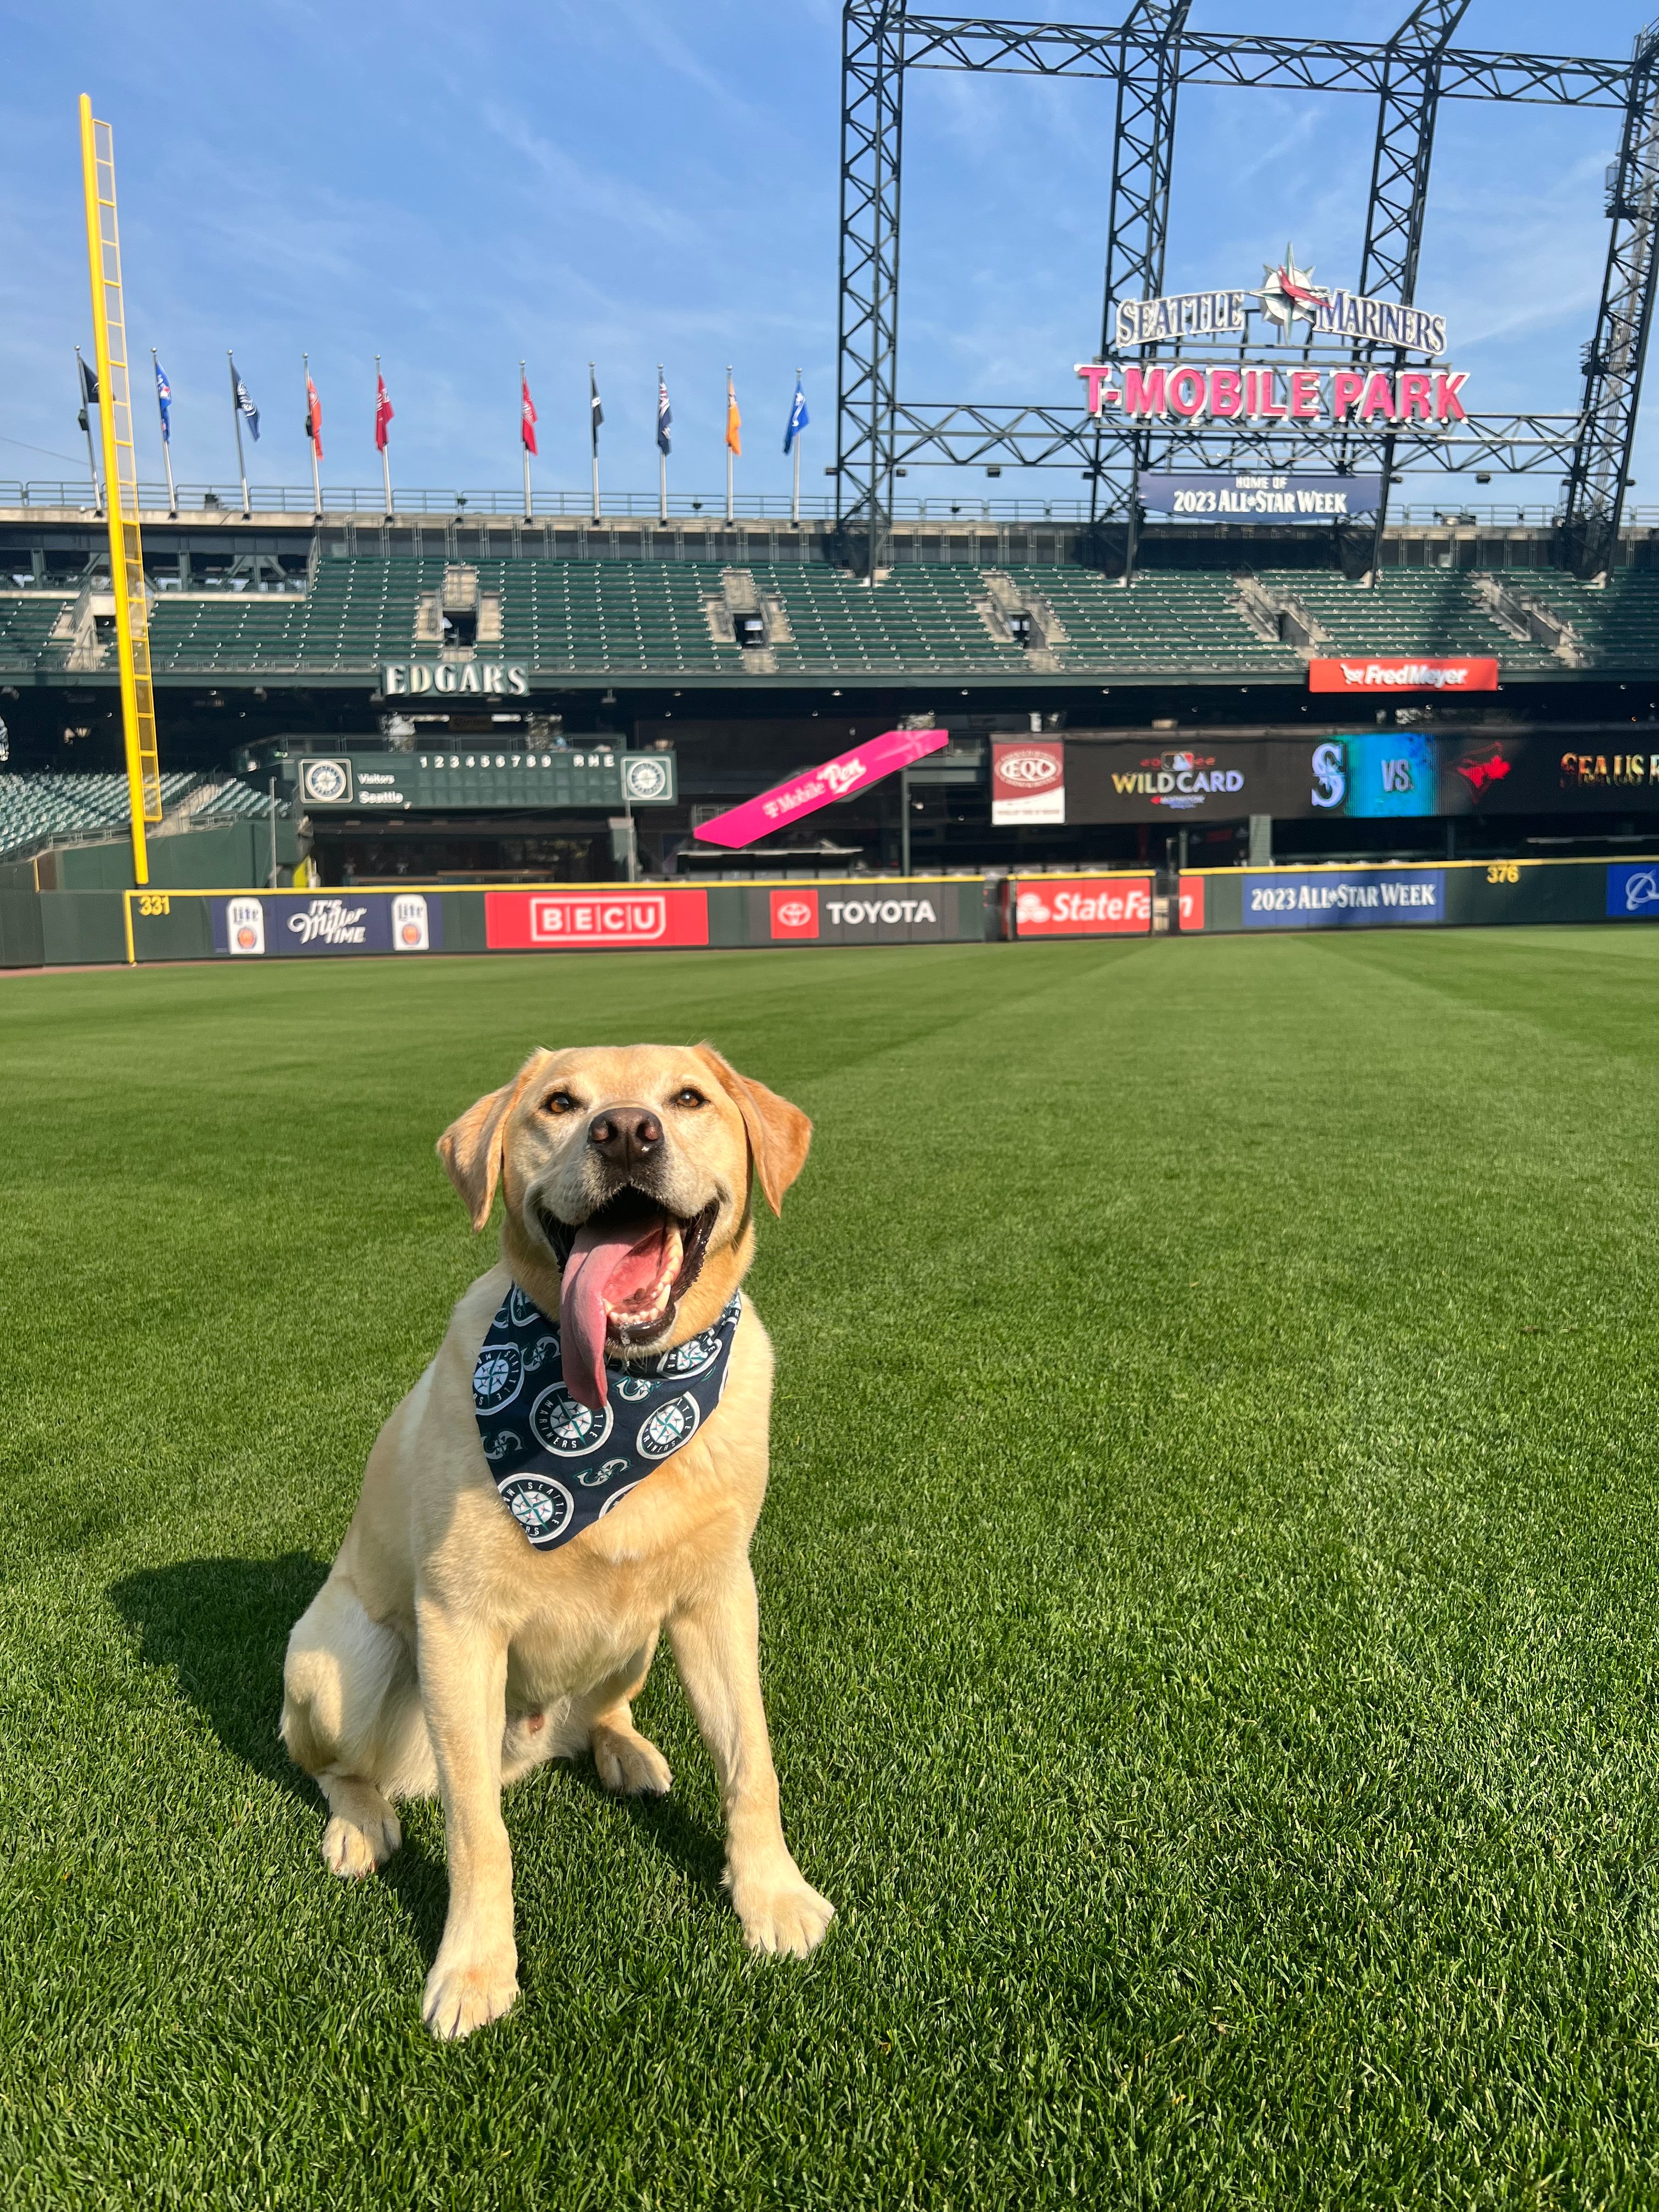 Tucker the Mariners Pup on Twitter: Go Mariners!   / Twitter